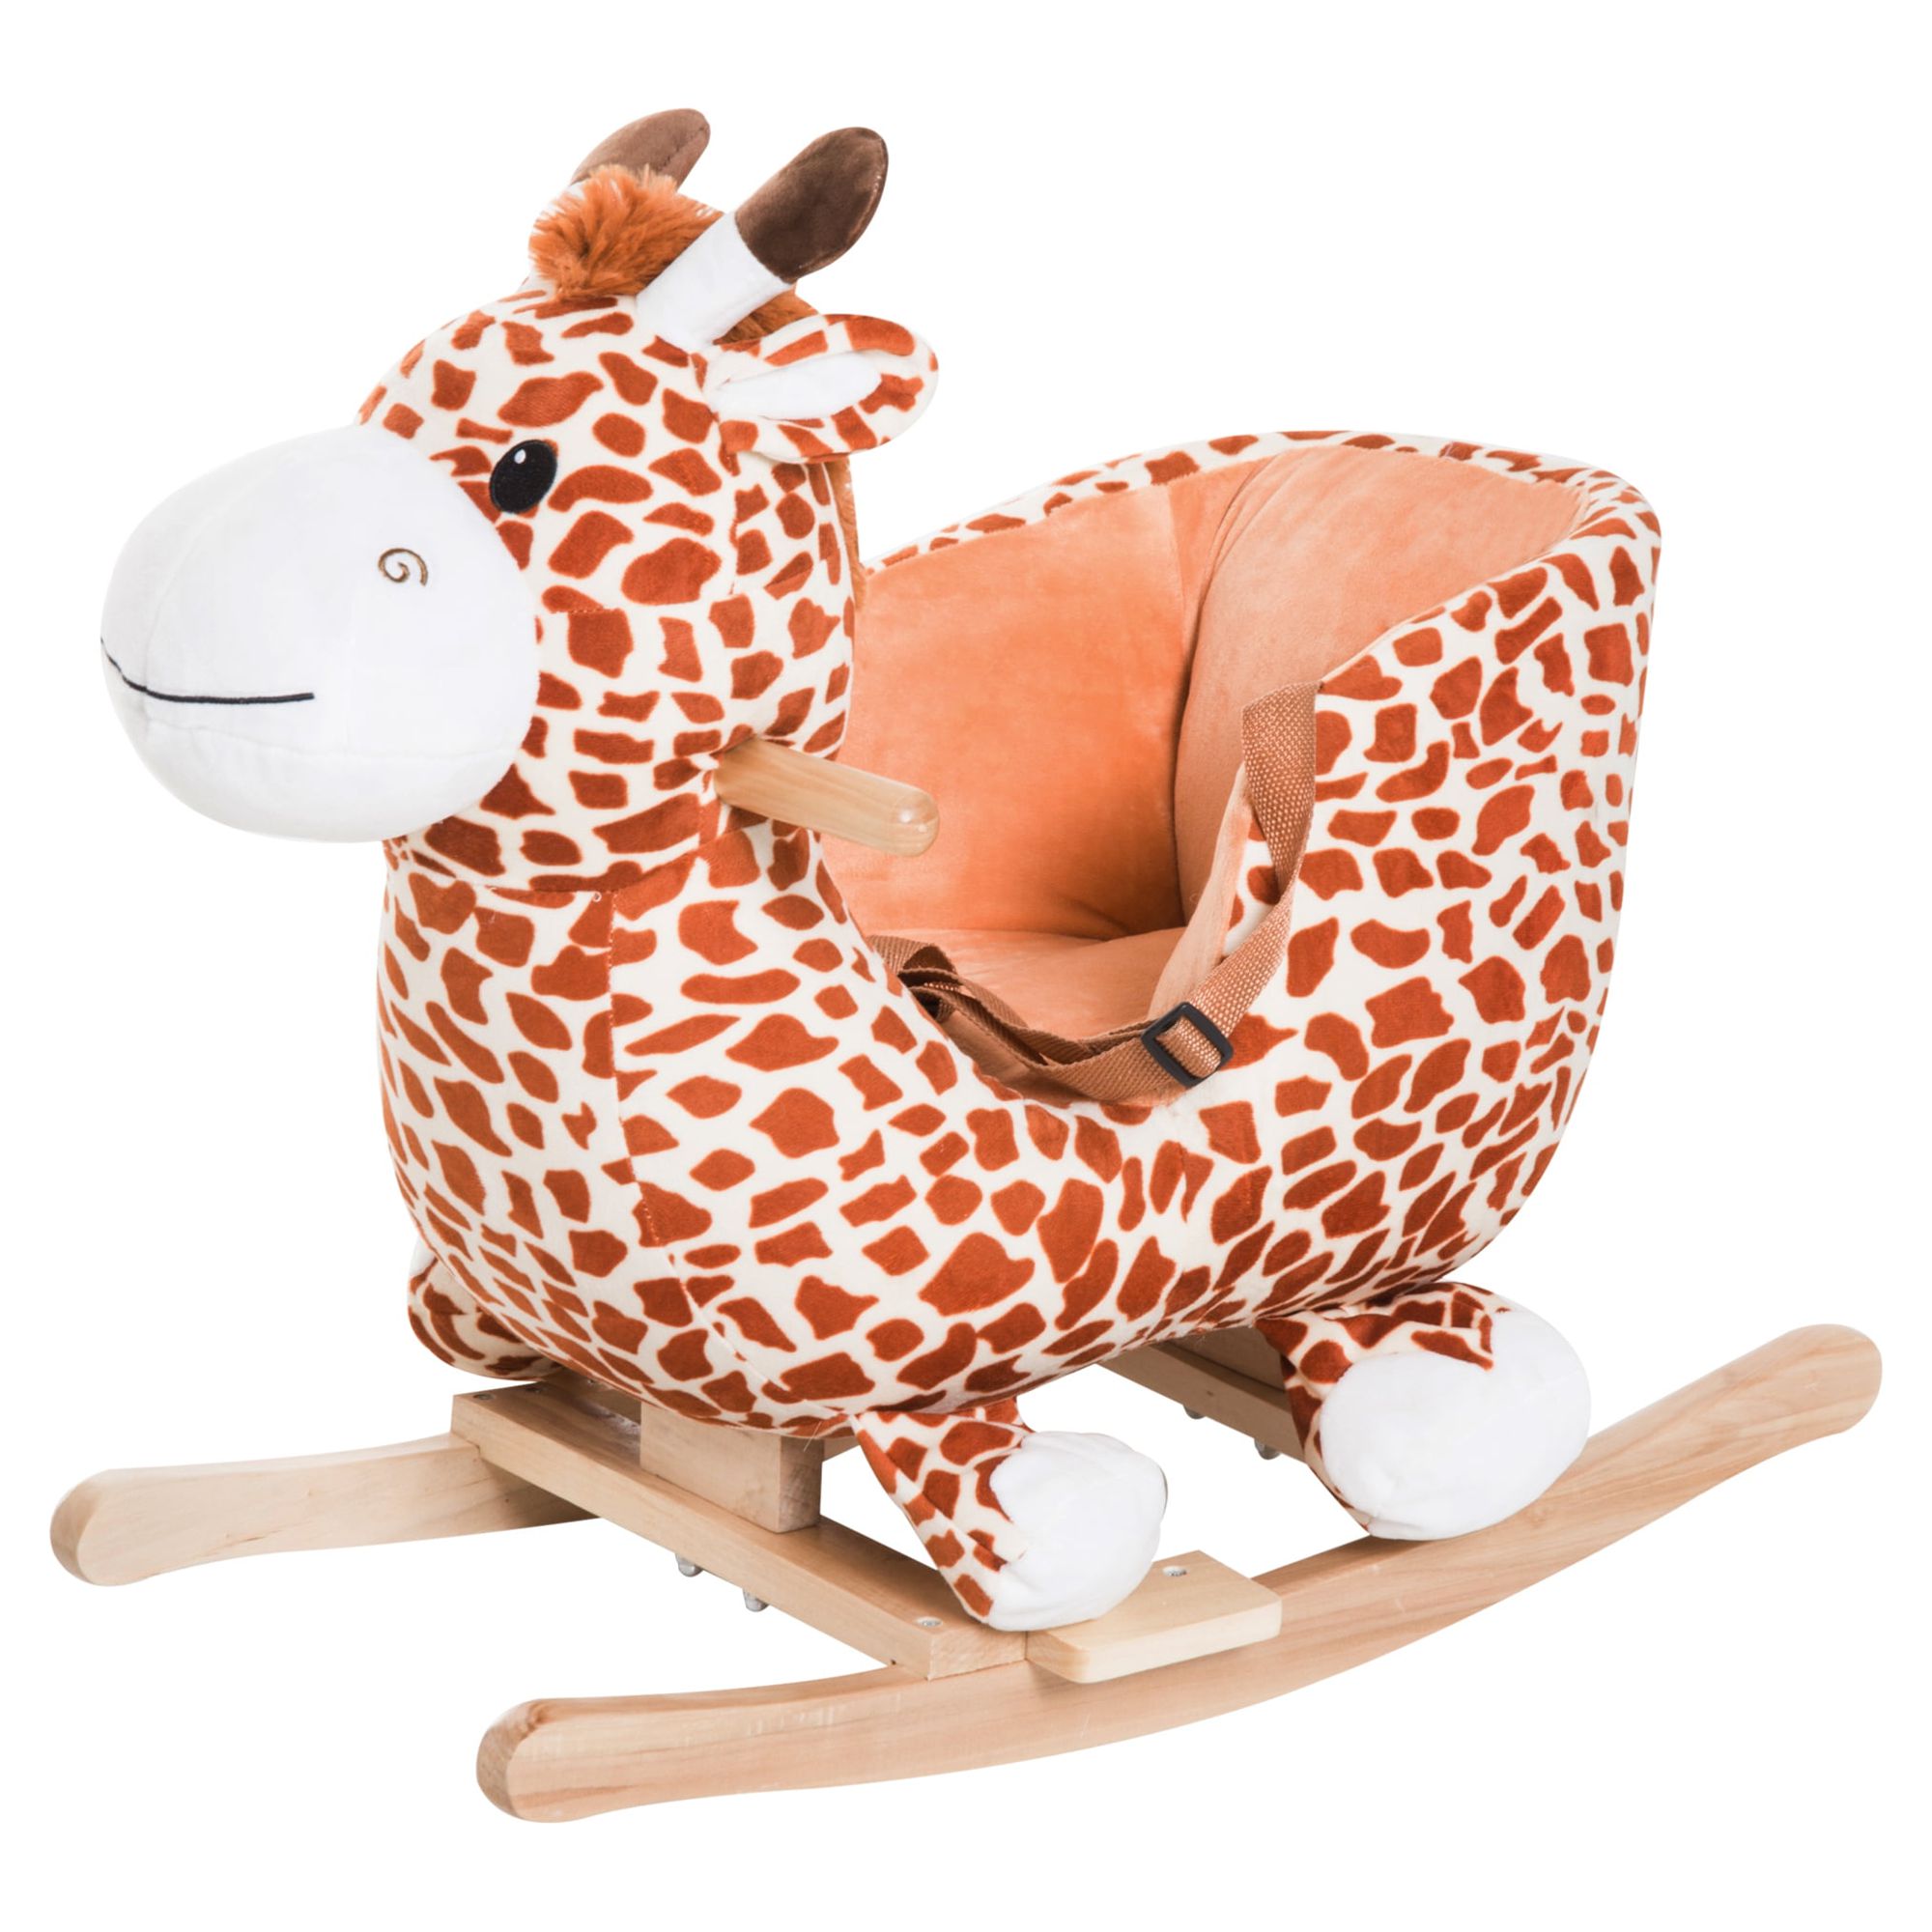 Qaba Kids Plush Rocking Horse Giraffe Style Themed Ride-On Chair Toy With Sound Brown - image 1 of 10